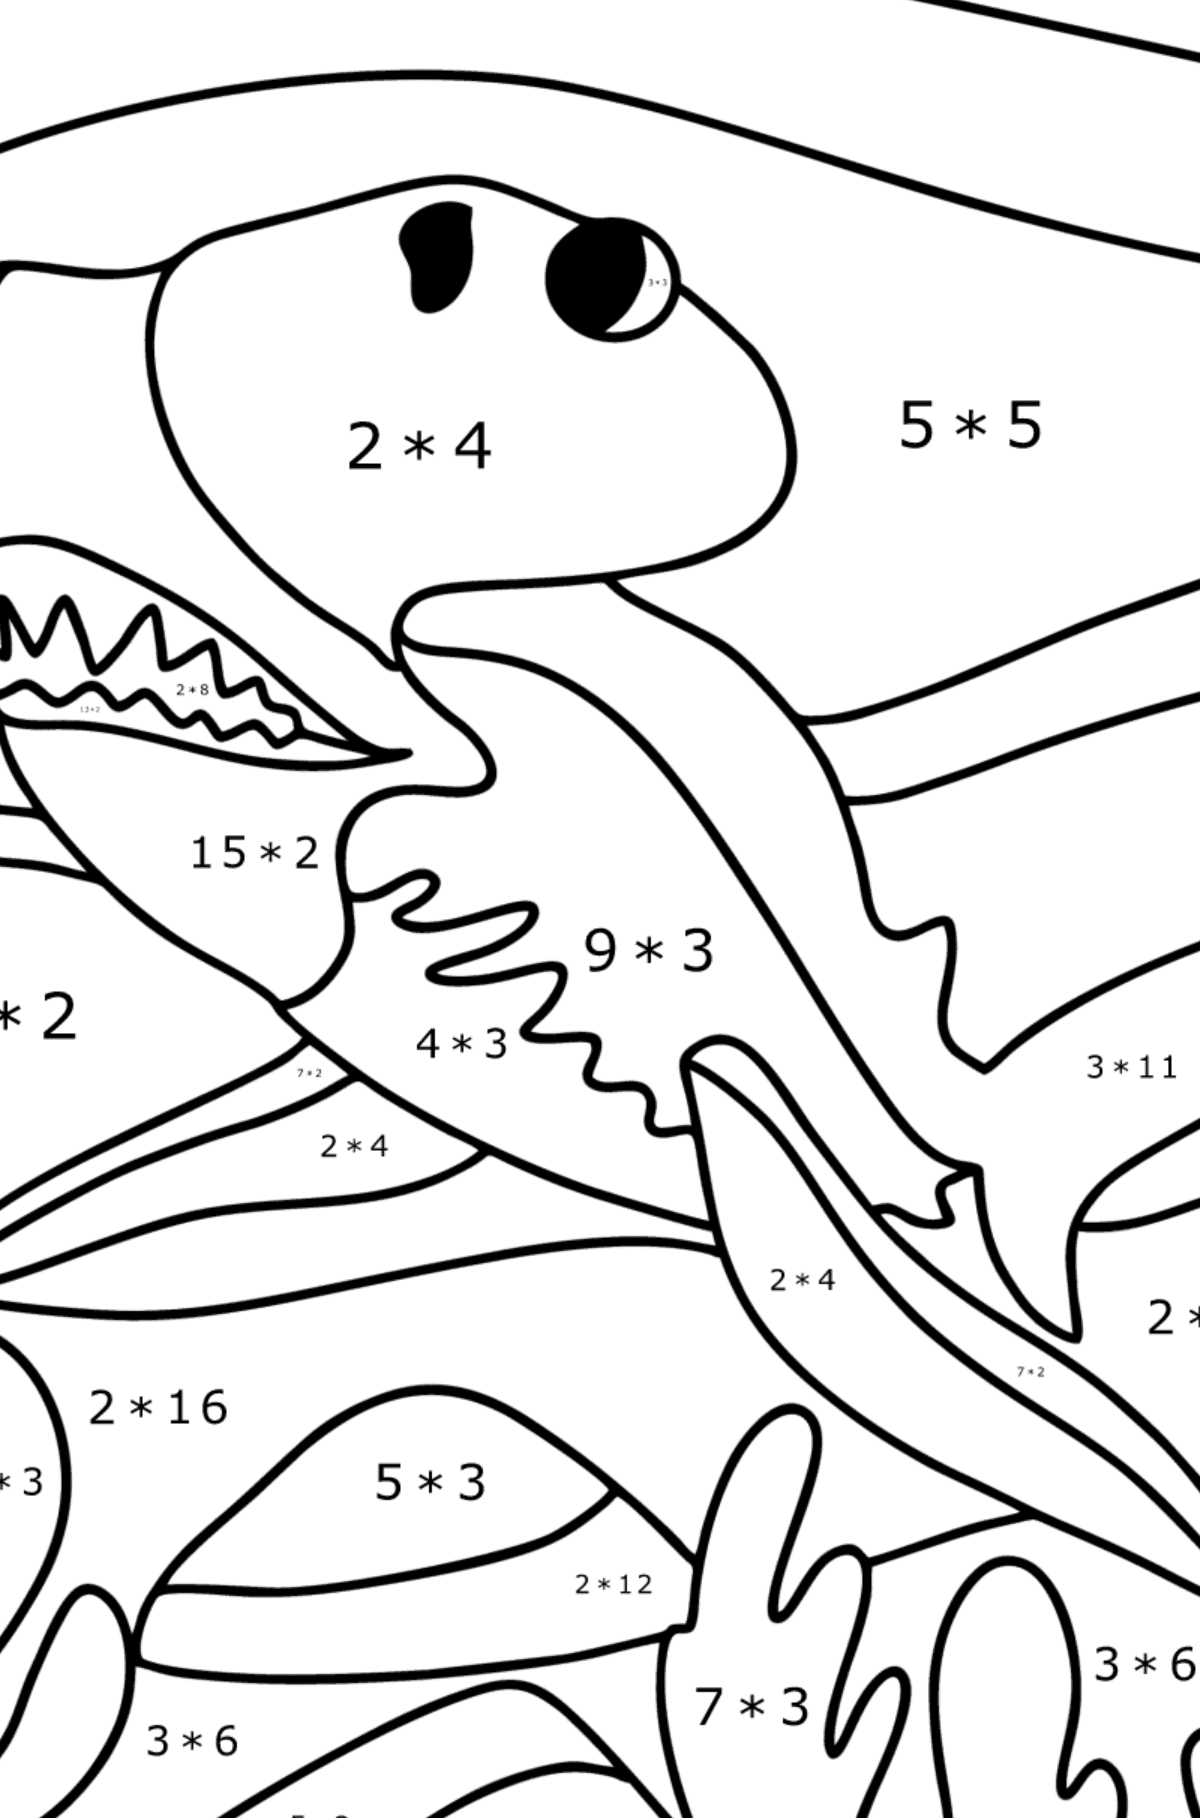 Hammerhead shark coloring page - Math Coloring - Multiplication for Kids